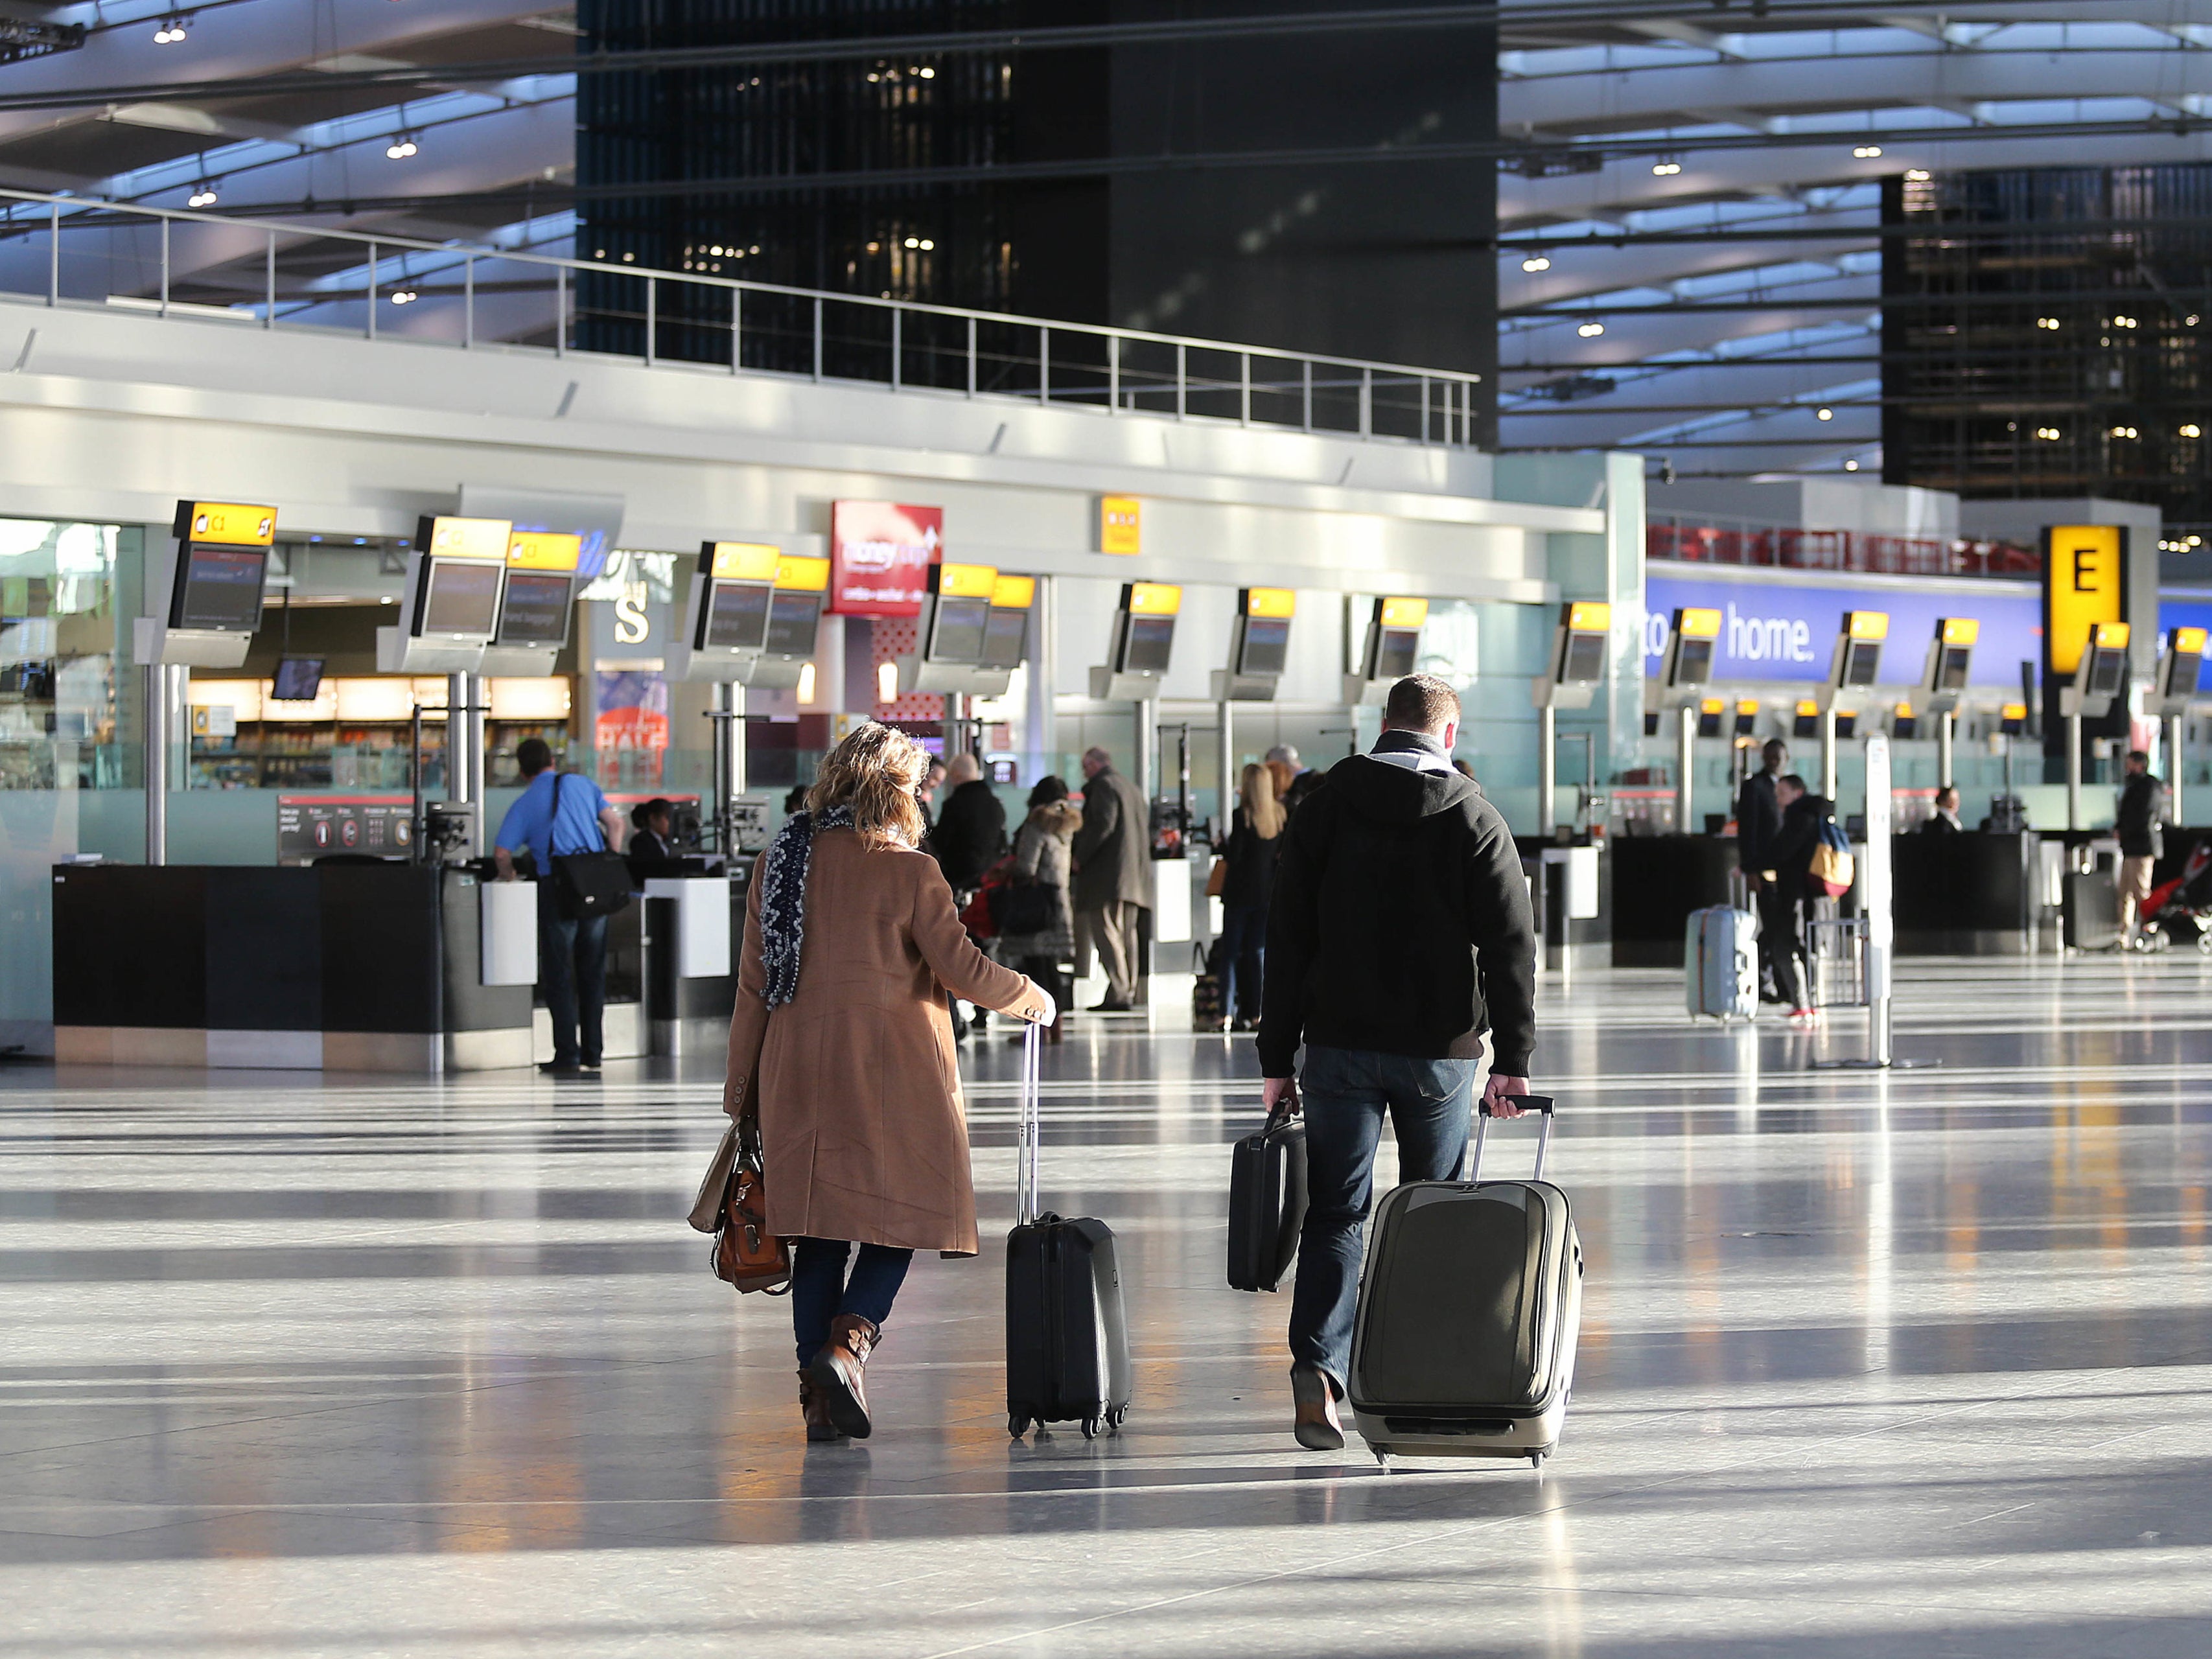 Ground stop: Many British Airways flights to and from Heathrow Terminal 5 have been cancelled